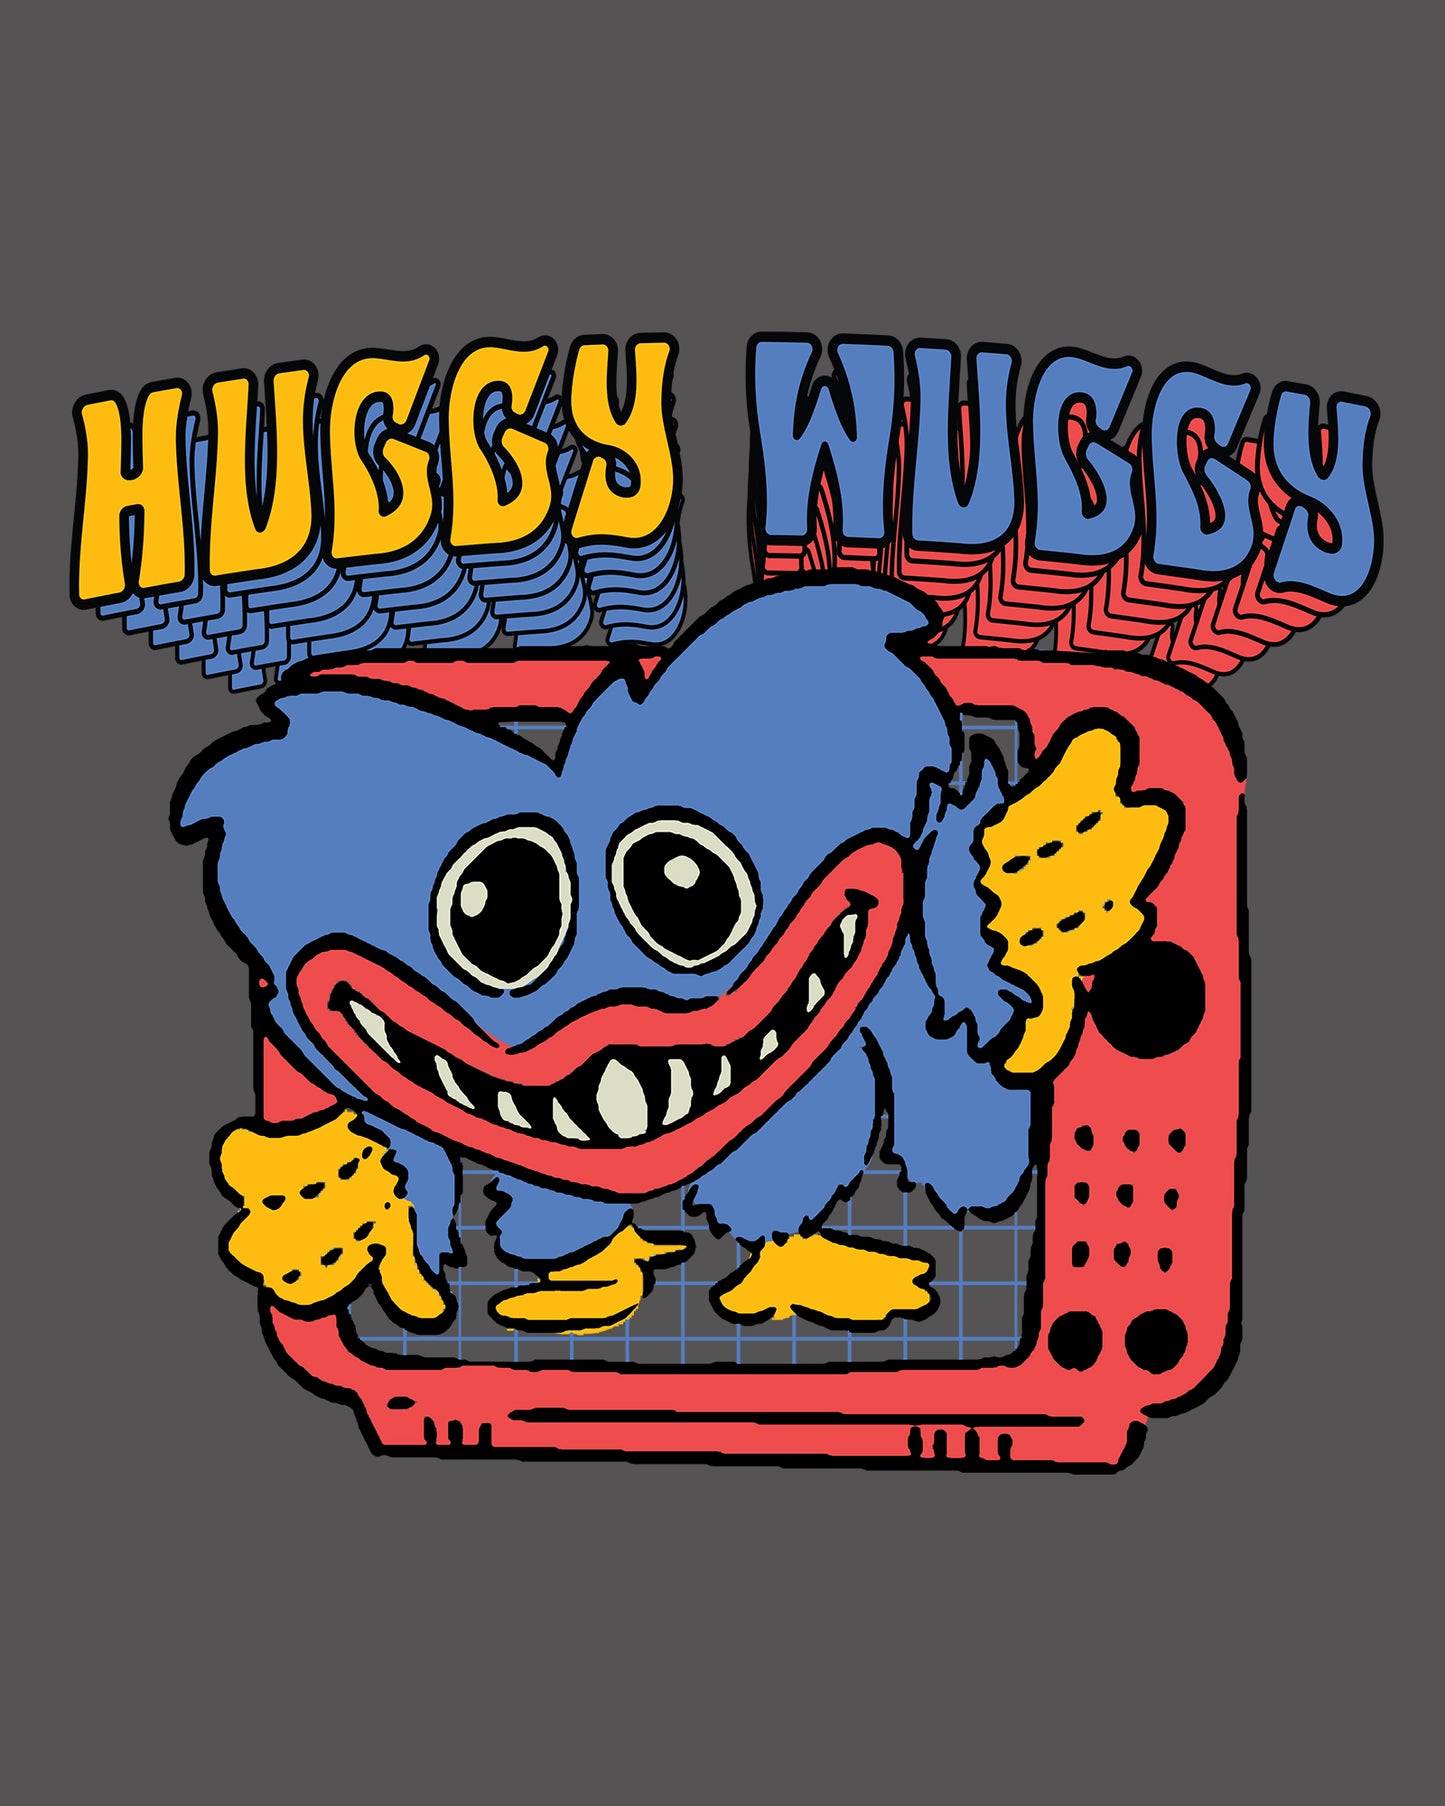 image on shirt: evil huggy wuggy coming out of tv set. text: huggy wuggy.